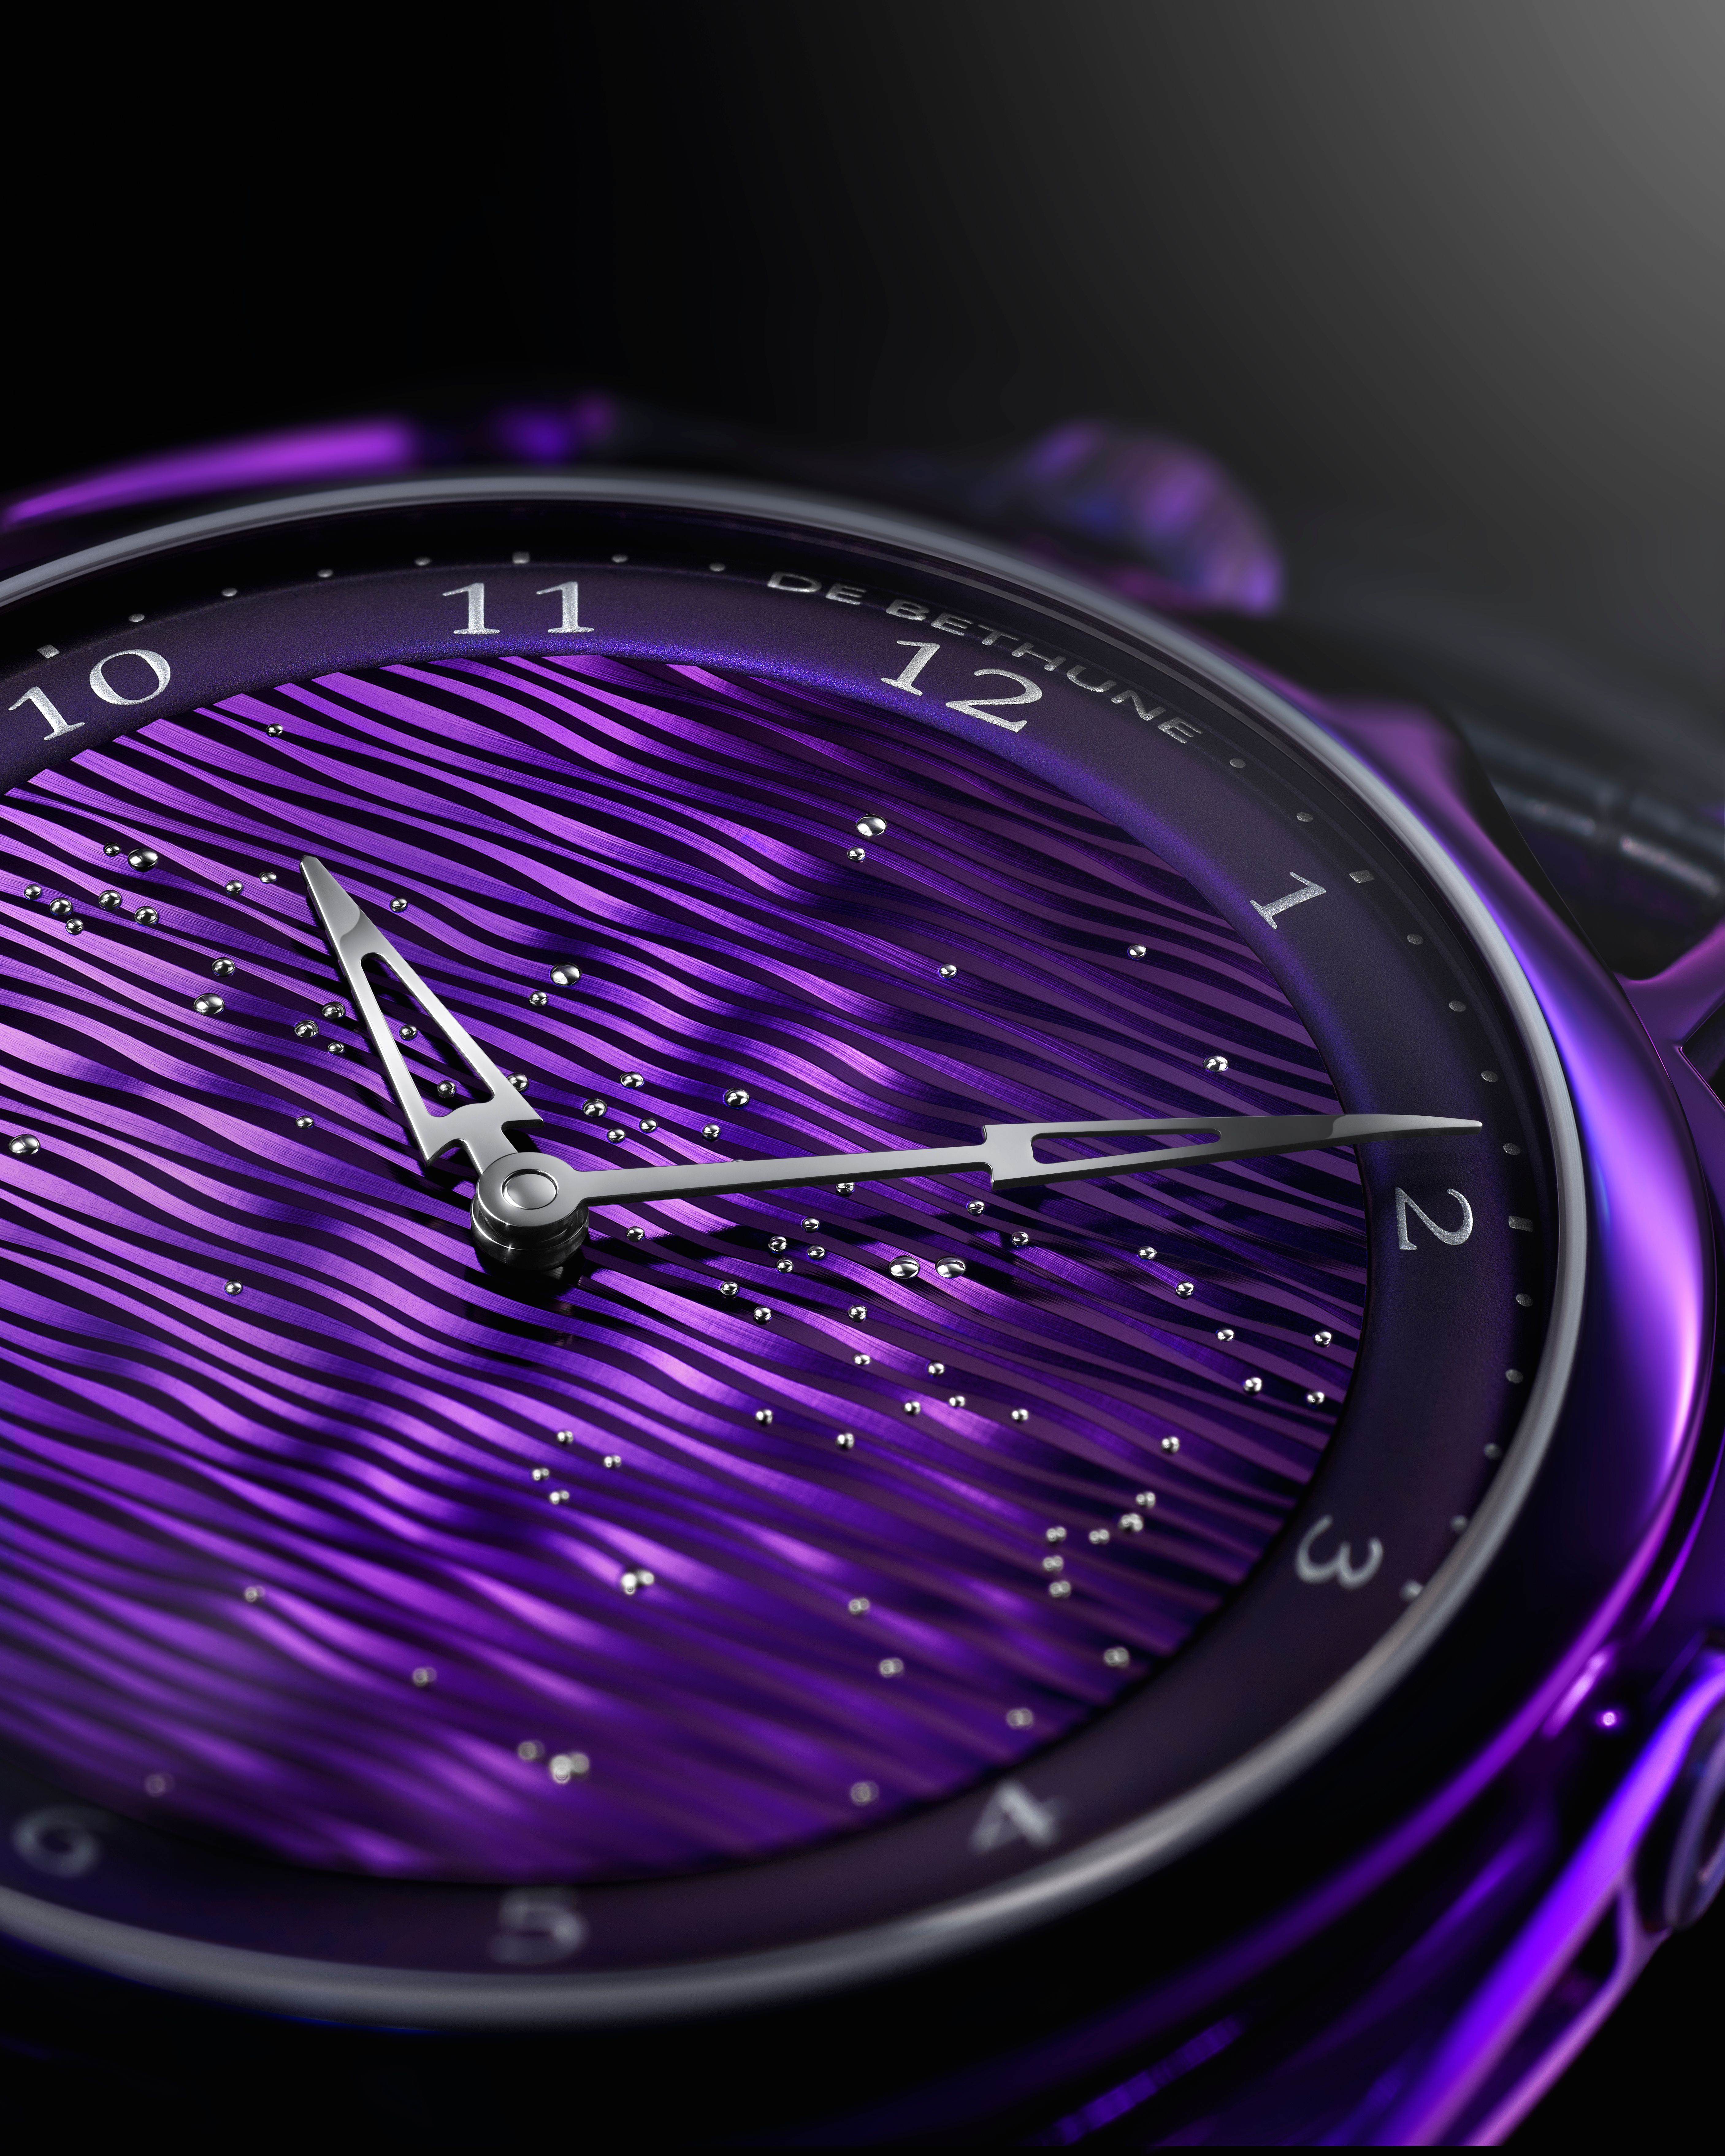 The heat purpled treatment extends to the titanium case, dial, floating lugs and the pin buckle as well